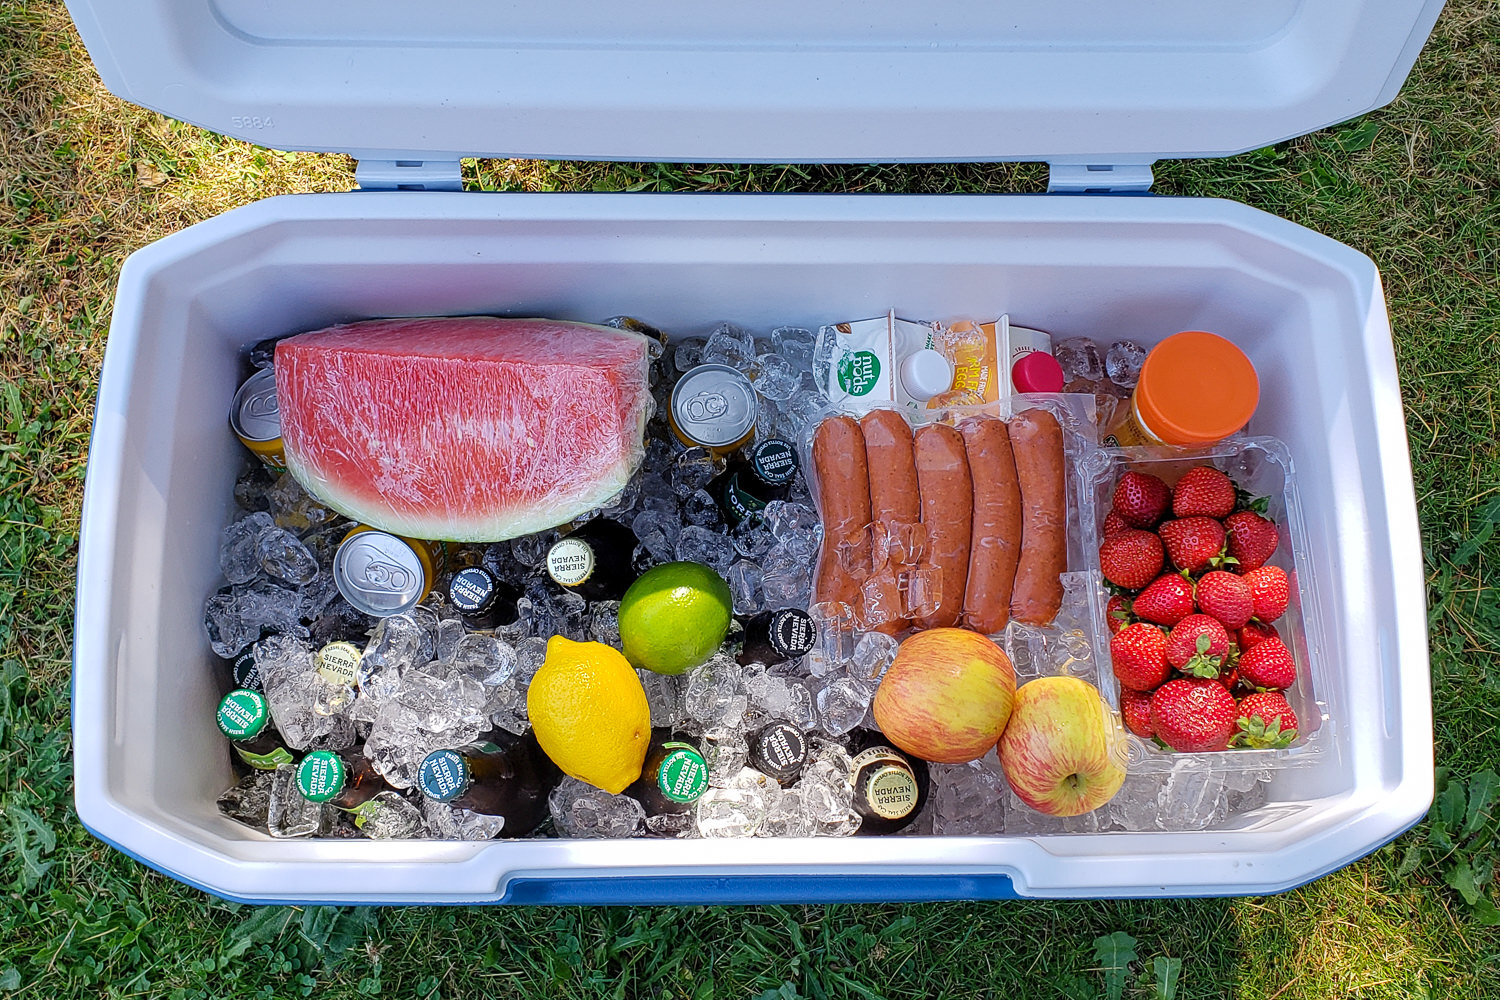 The best coolers to actually keep drinks cold when you're camping